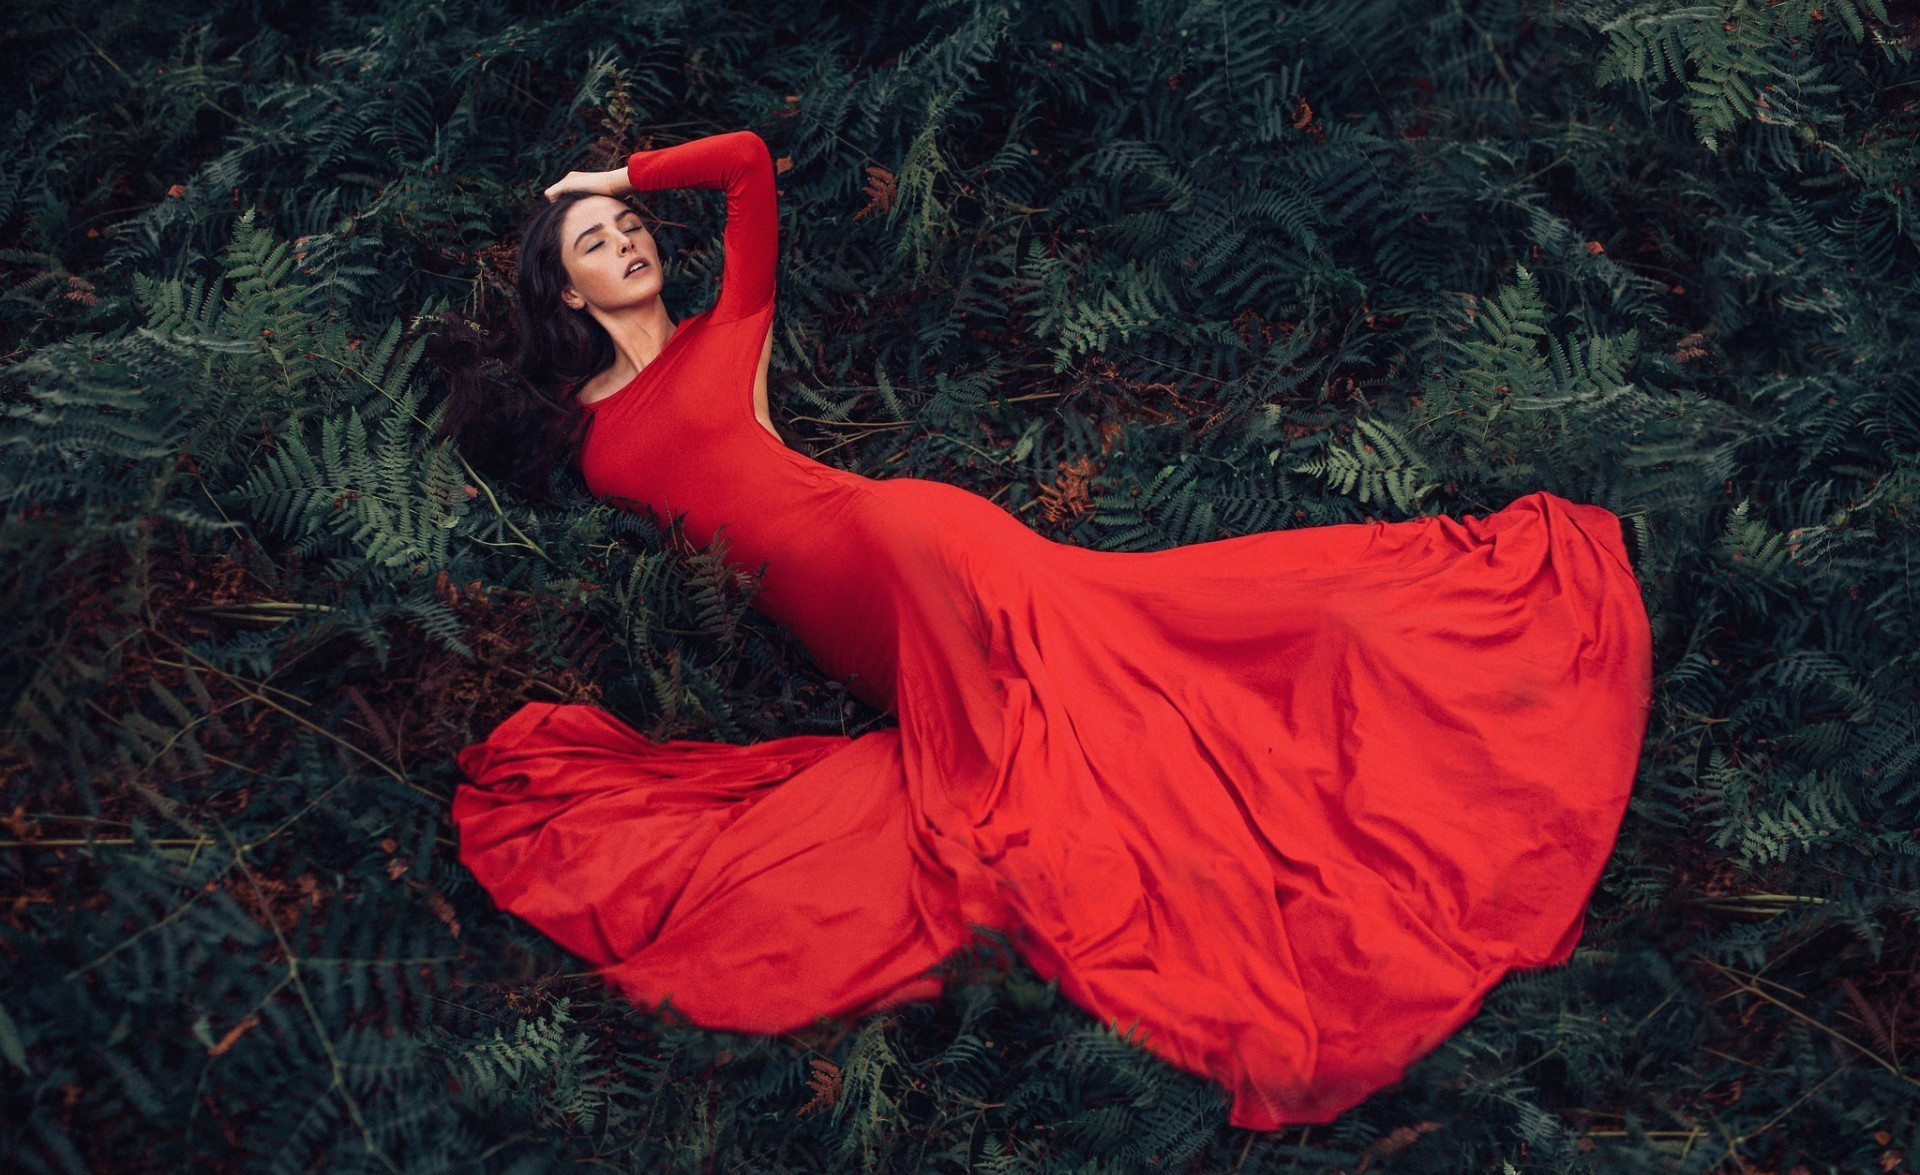 People 1920x1175 dress women women outdoors model red dress red clothing nature plants closed eyes brunette long hair